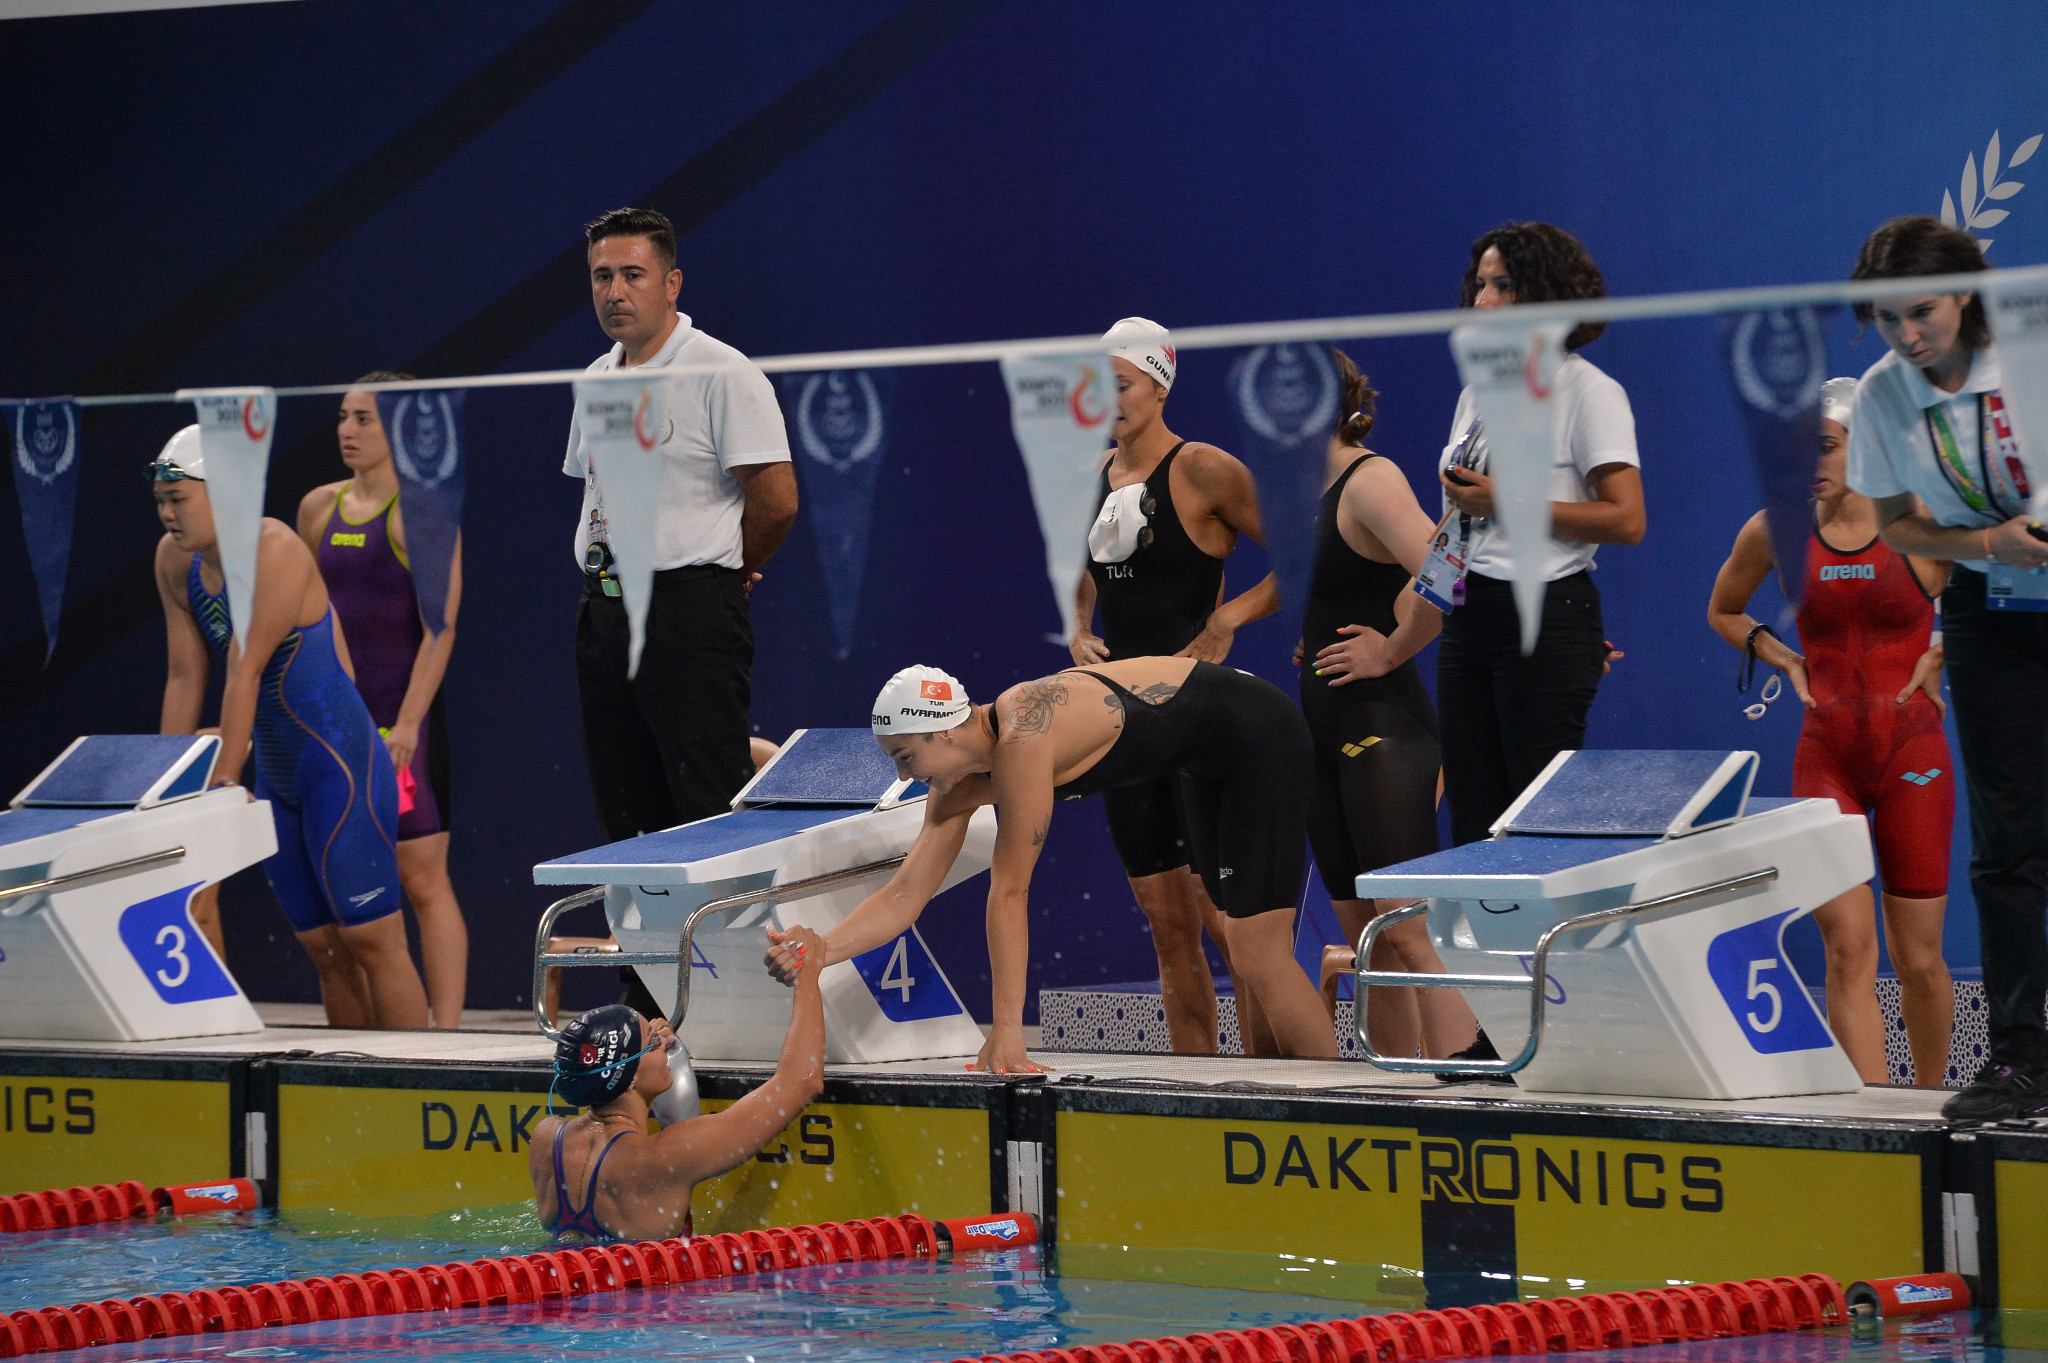 Turkey won the women's 4x100m medley relay to cap off a sensational swimming competition for the hosts ©Konya 2021